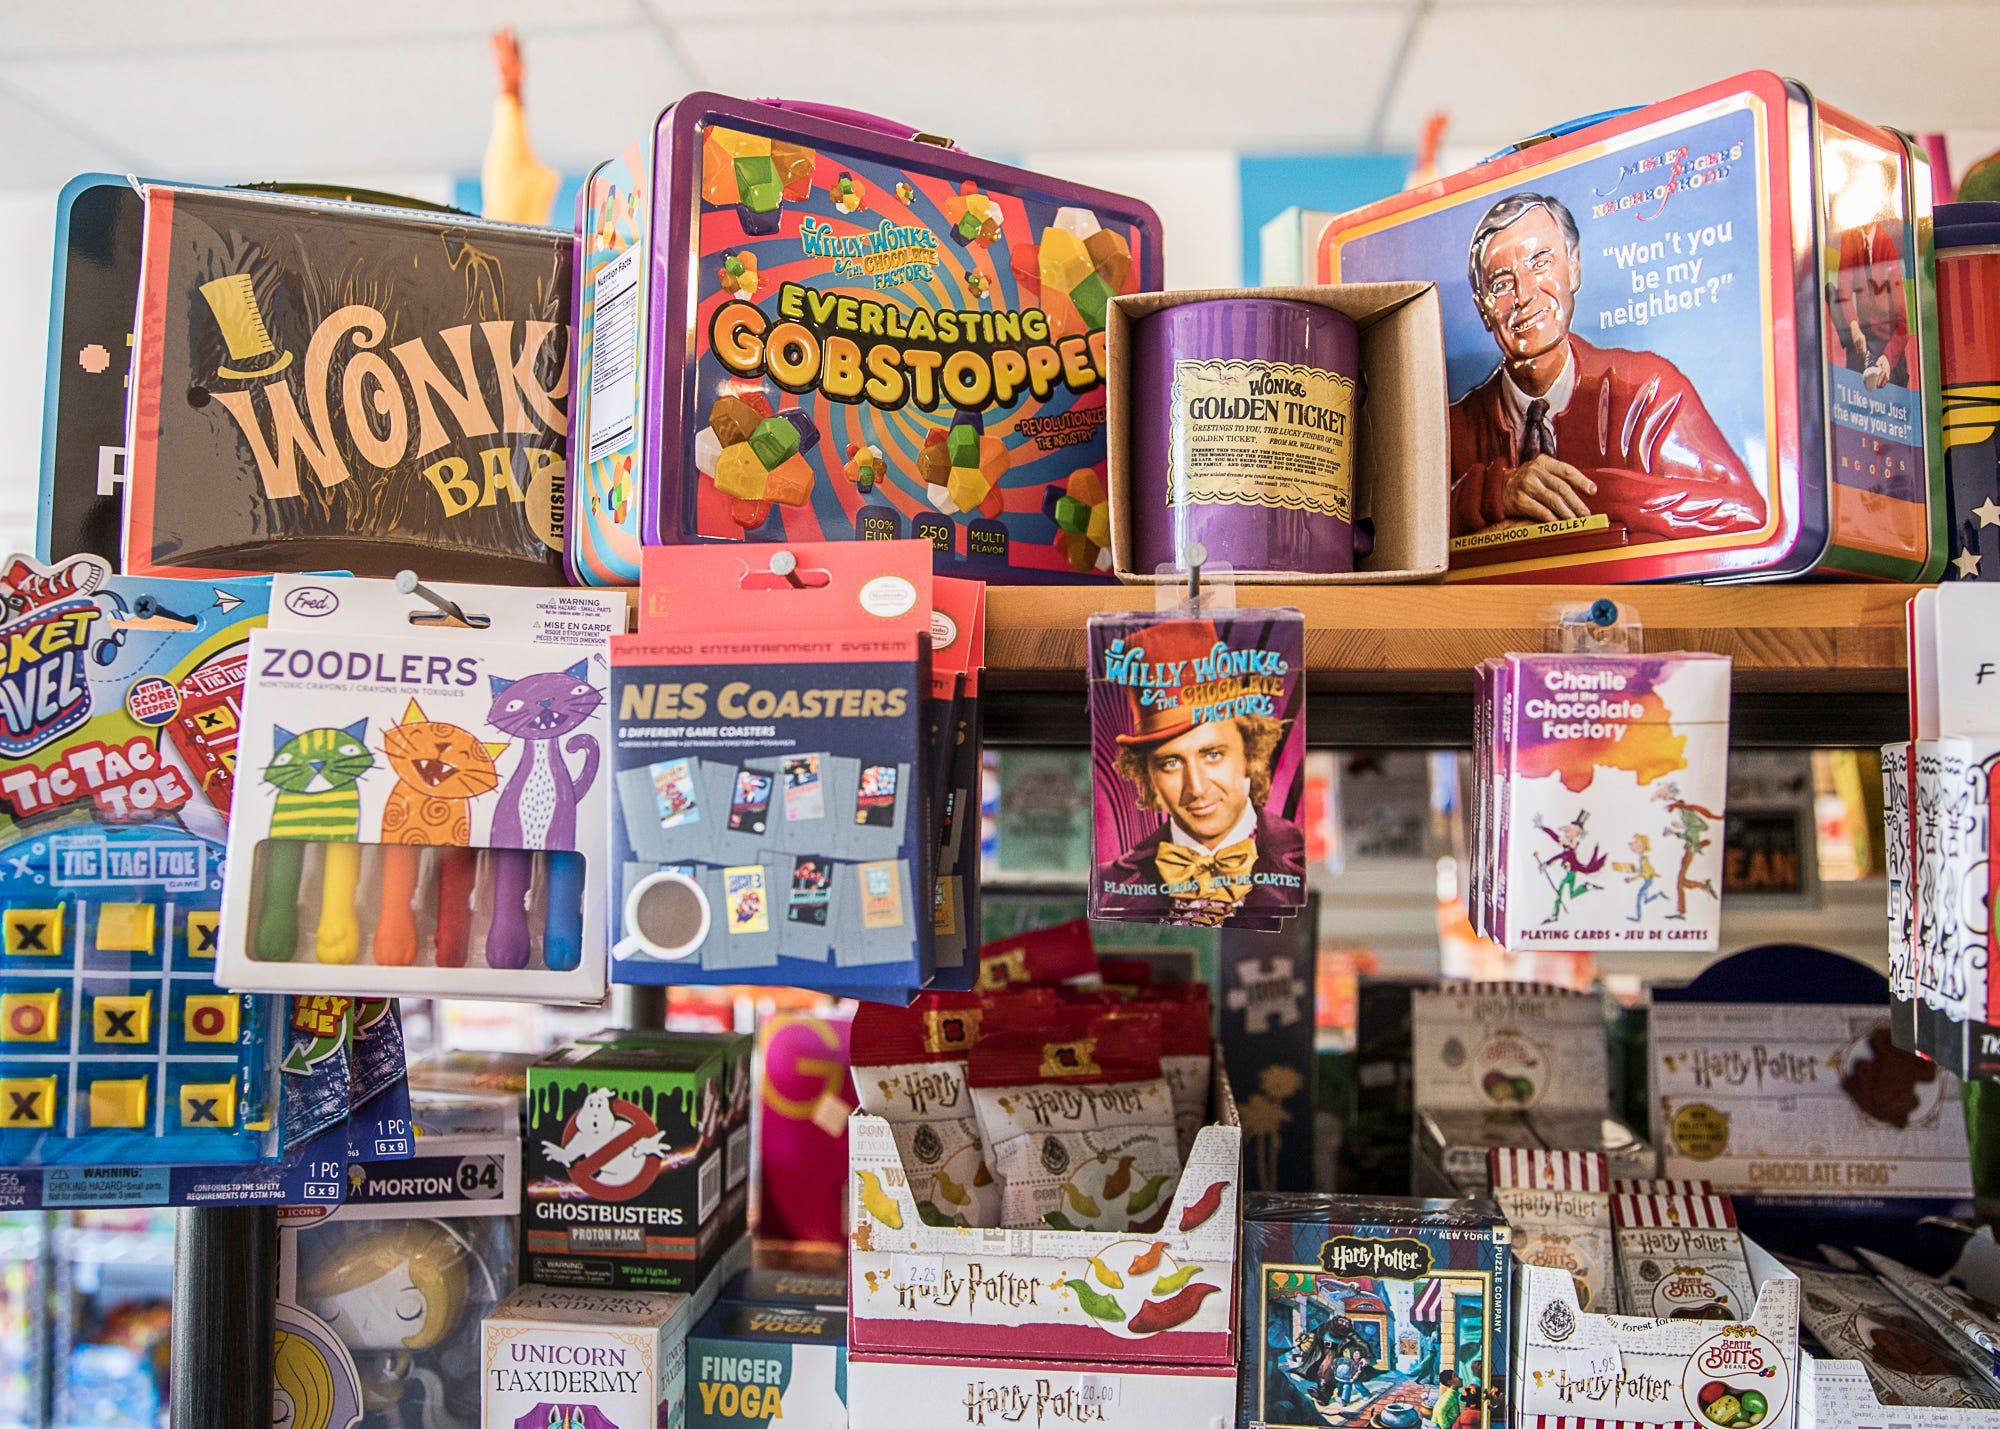 Not only does Joe’s Candy Shop have the regular candy options, but also many nostalgic items that feature Mr. Rogers, The Golden Girls, Ghostbusters and Harry Potter to name a few.